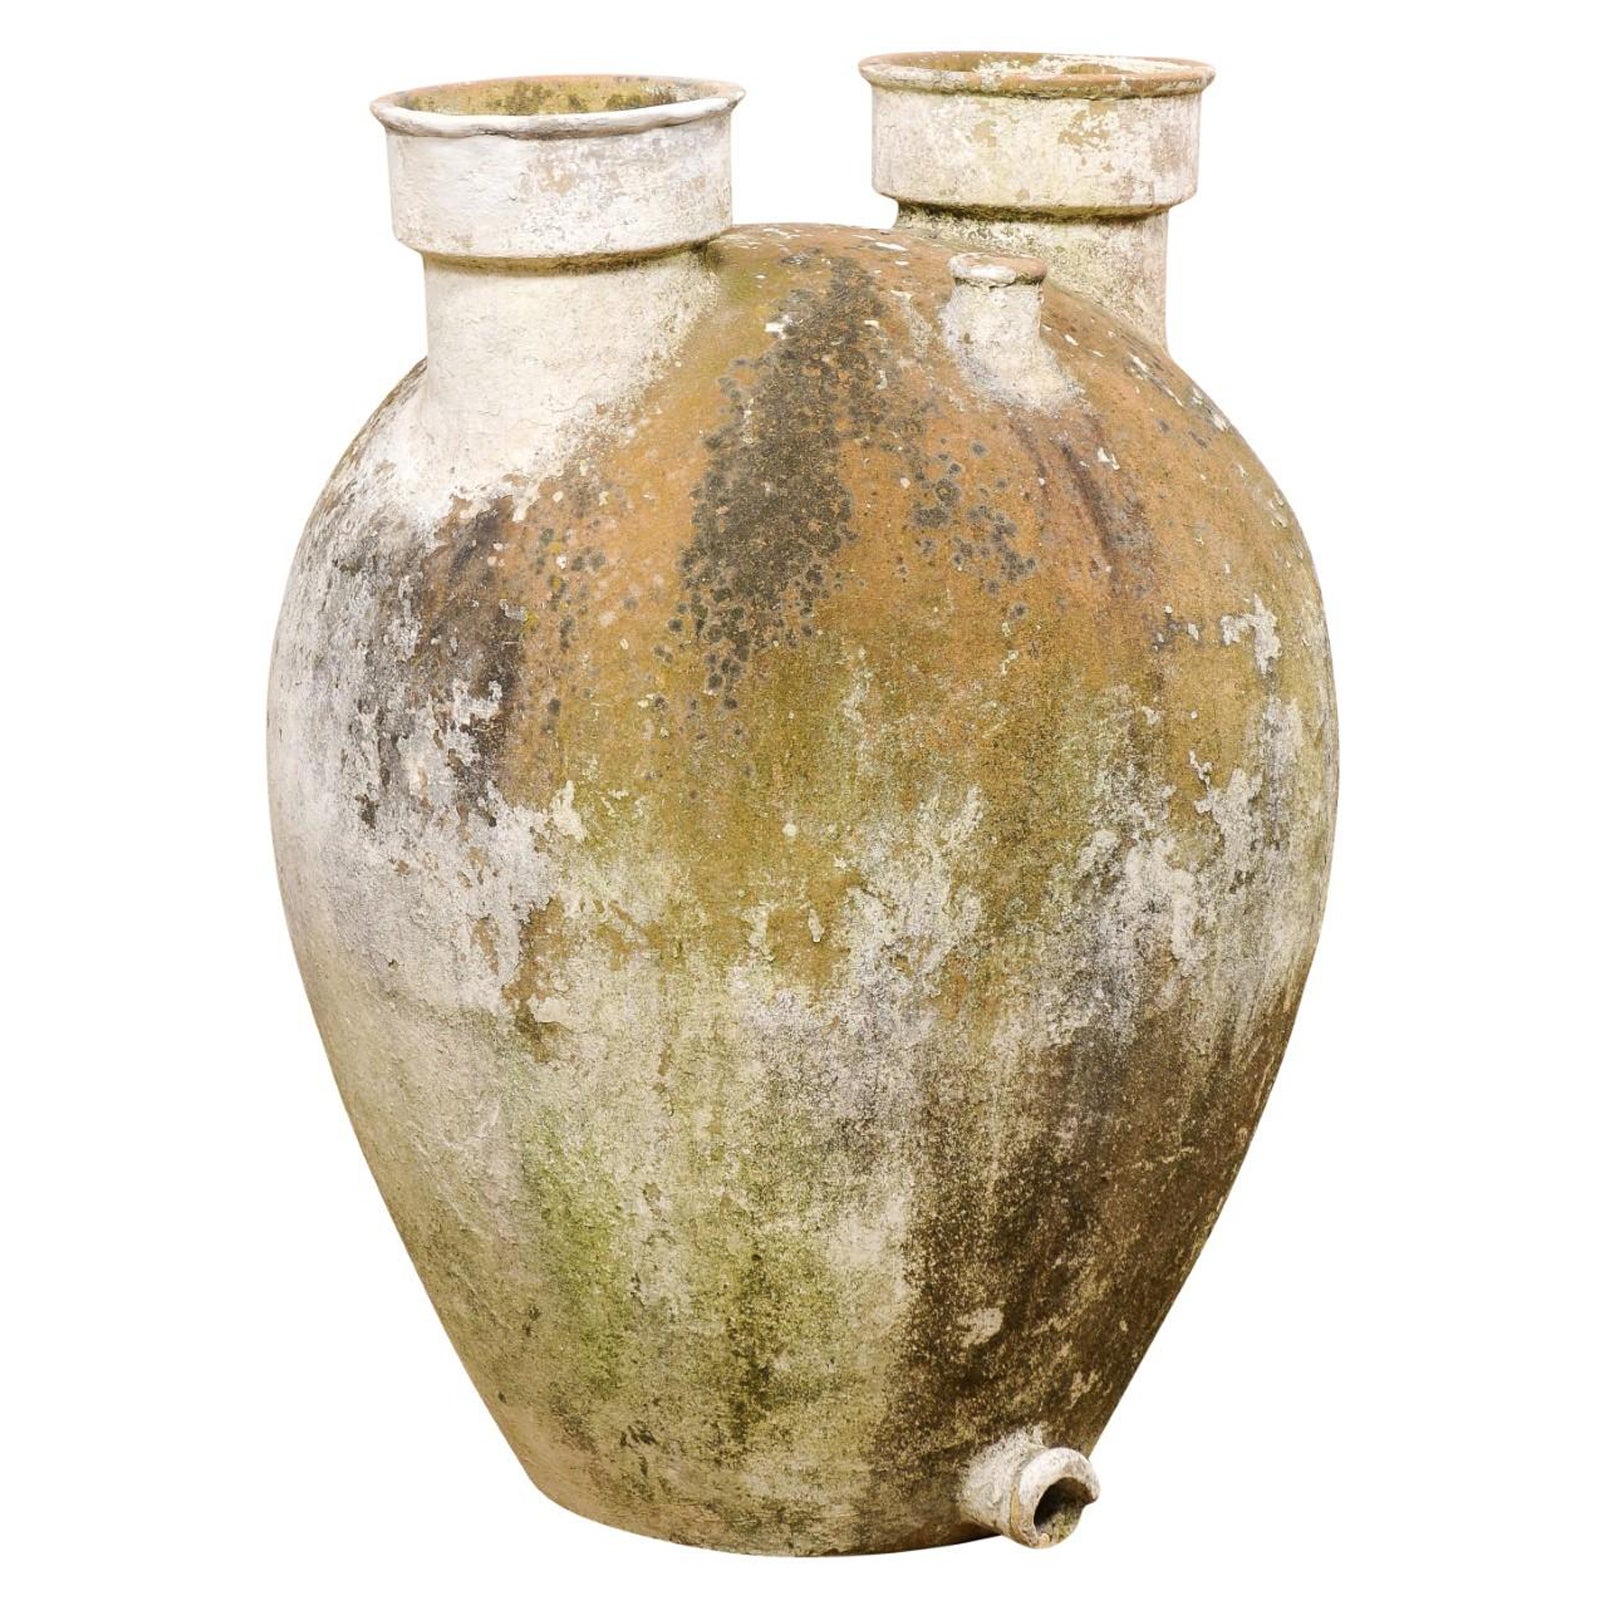 Spanish Large-Sized Terracotta Jar from the turn of the 19th & 20th C.